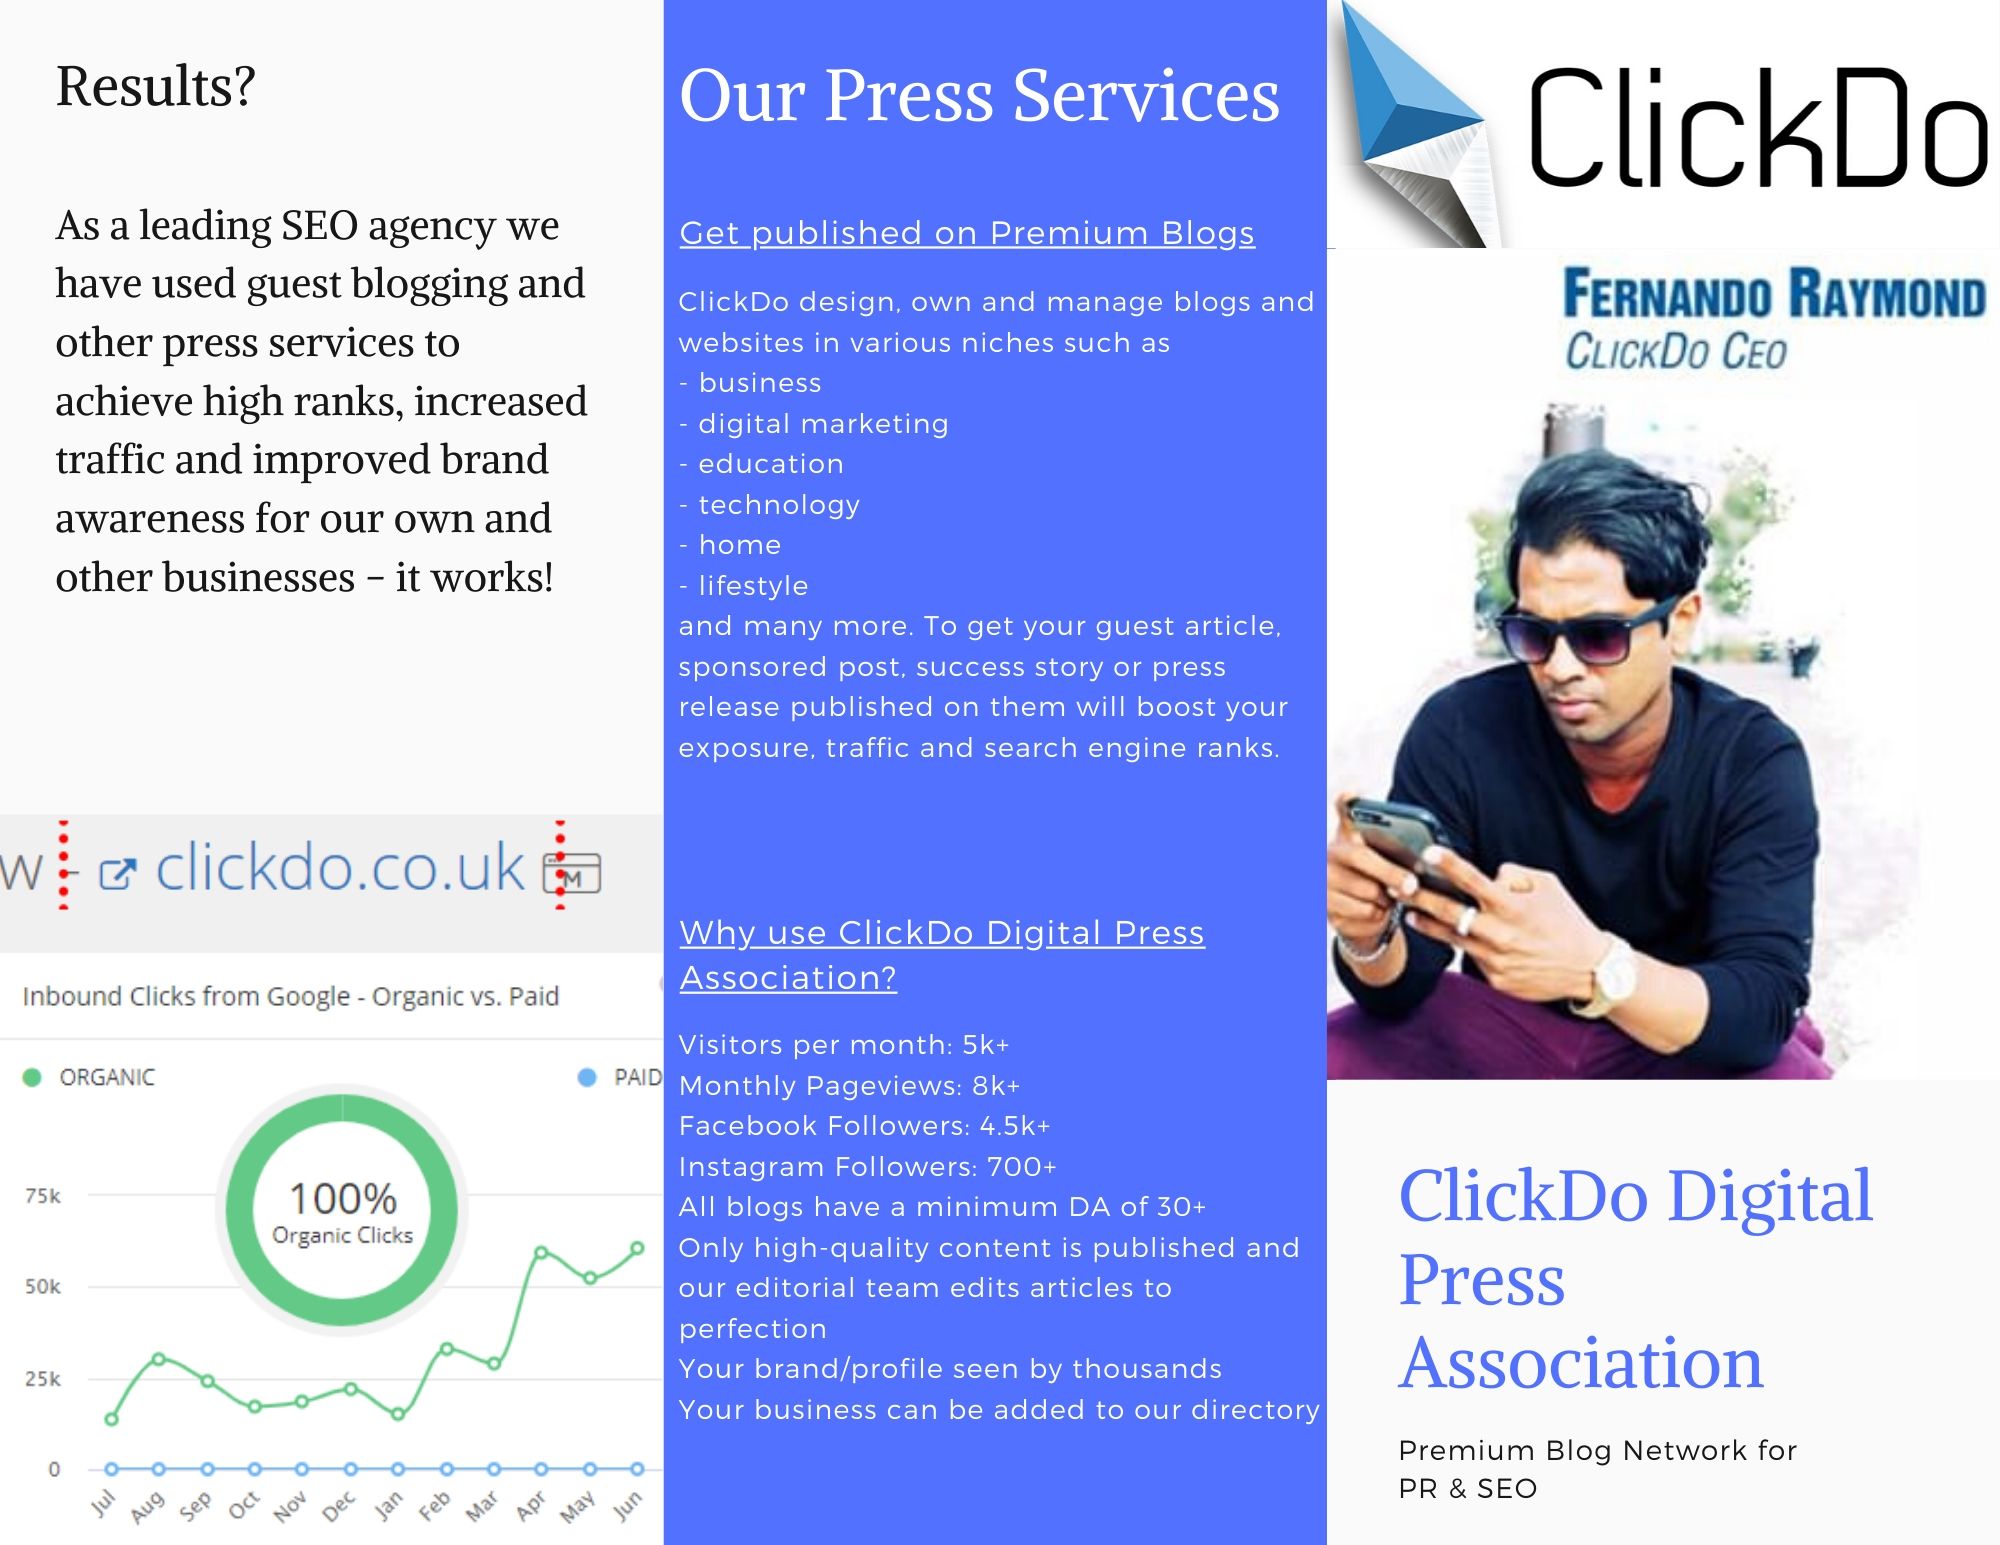 Press services to boost SEO, exposure, web traffic, ranks, authority